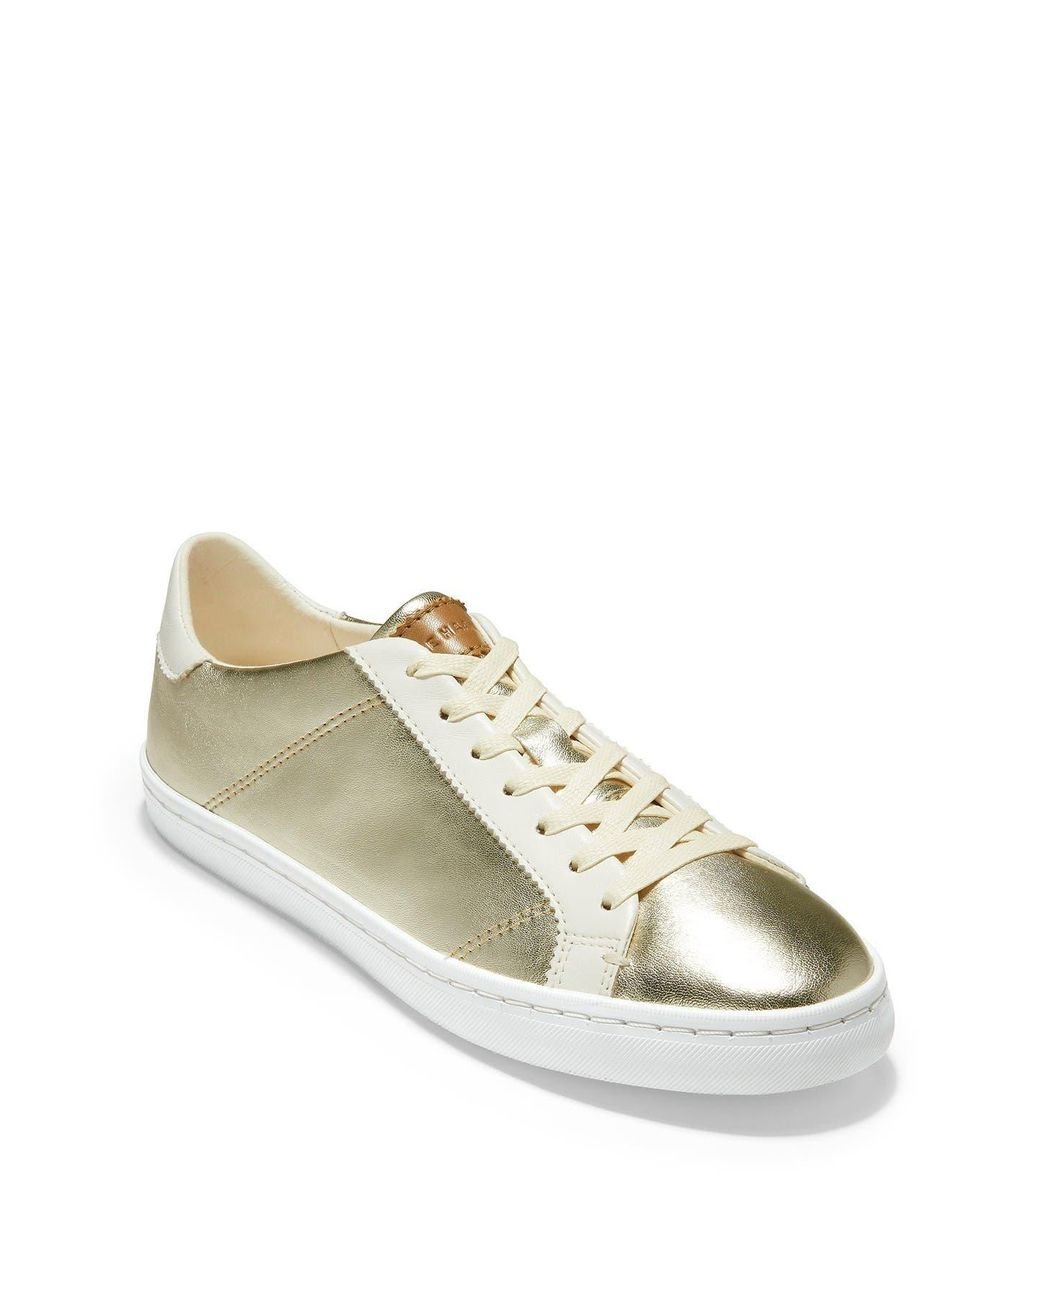 Cole Haan Margo Lace-up Leather Sneaker in Soft Gold/ (Metallic) - Lyst